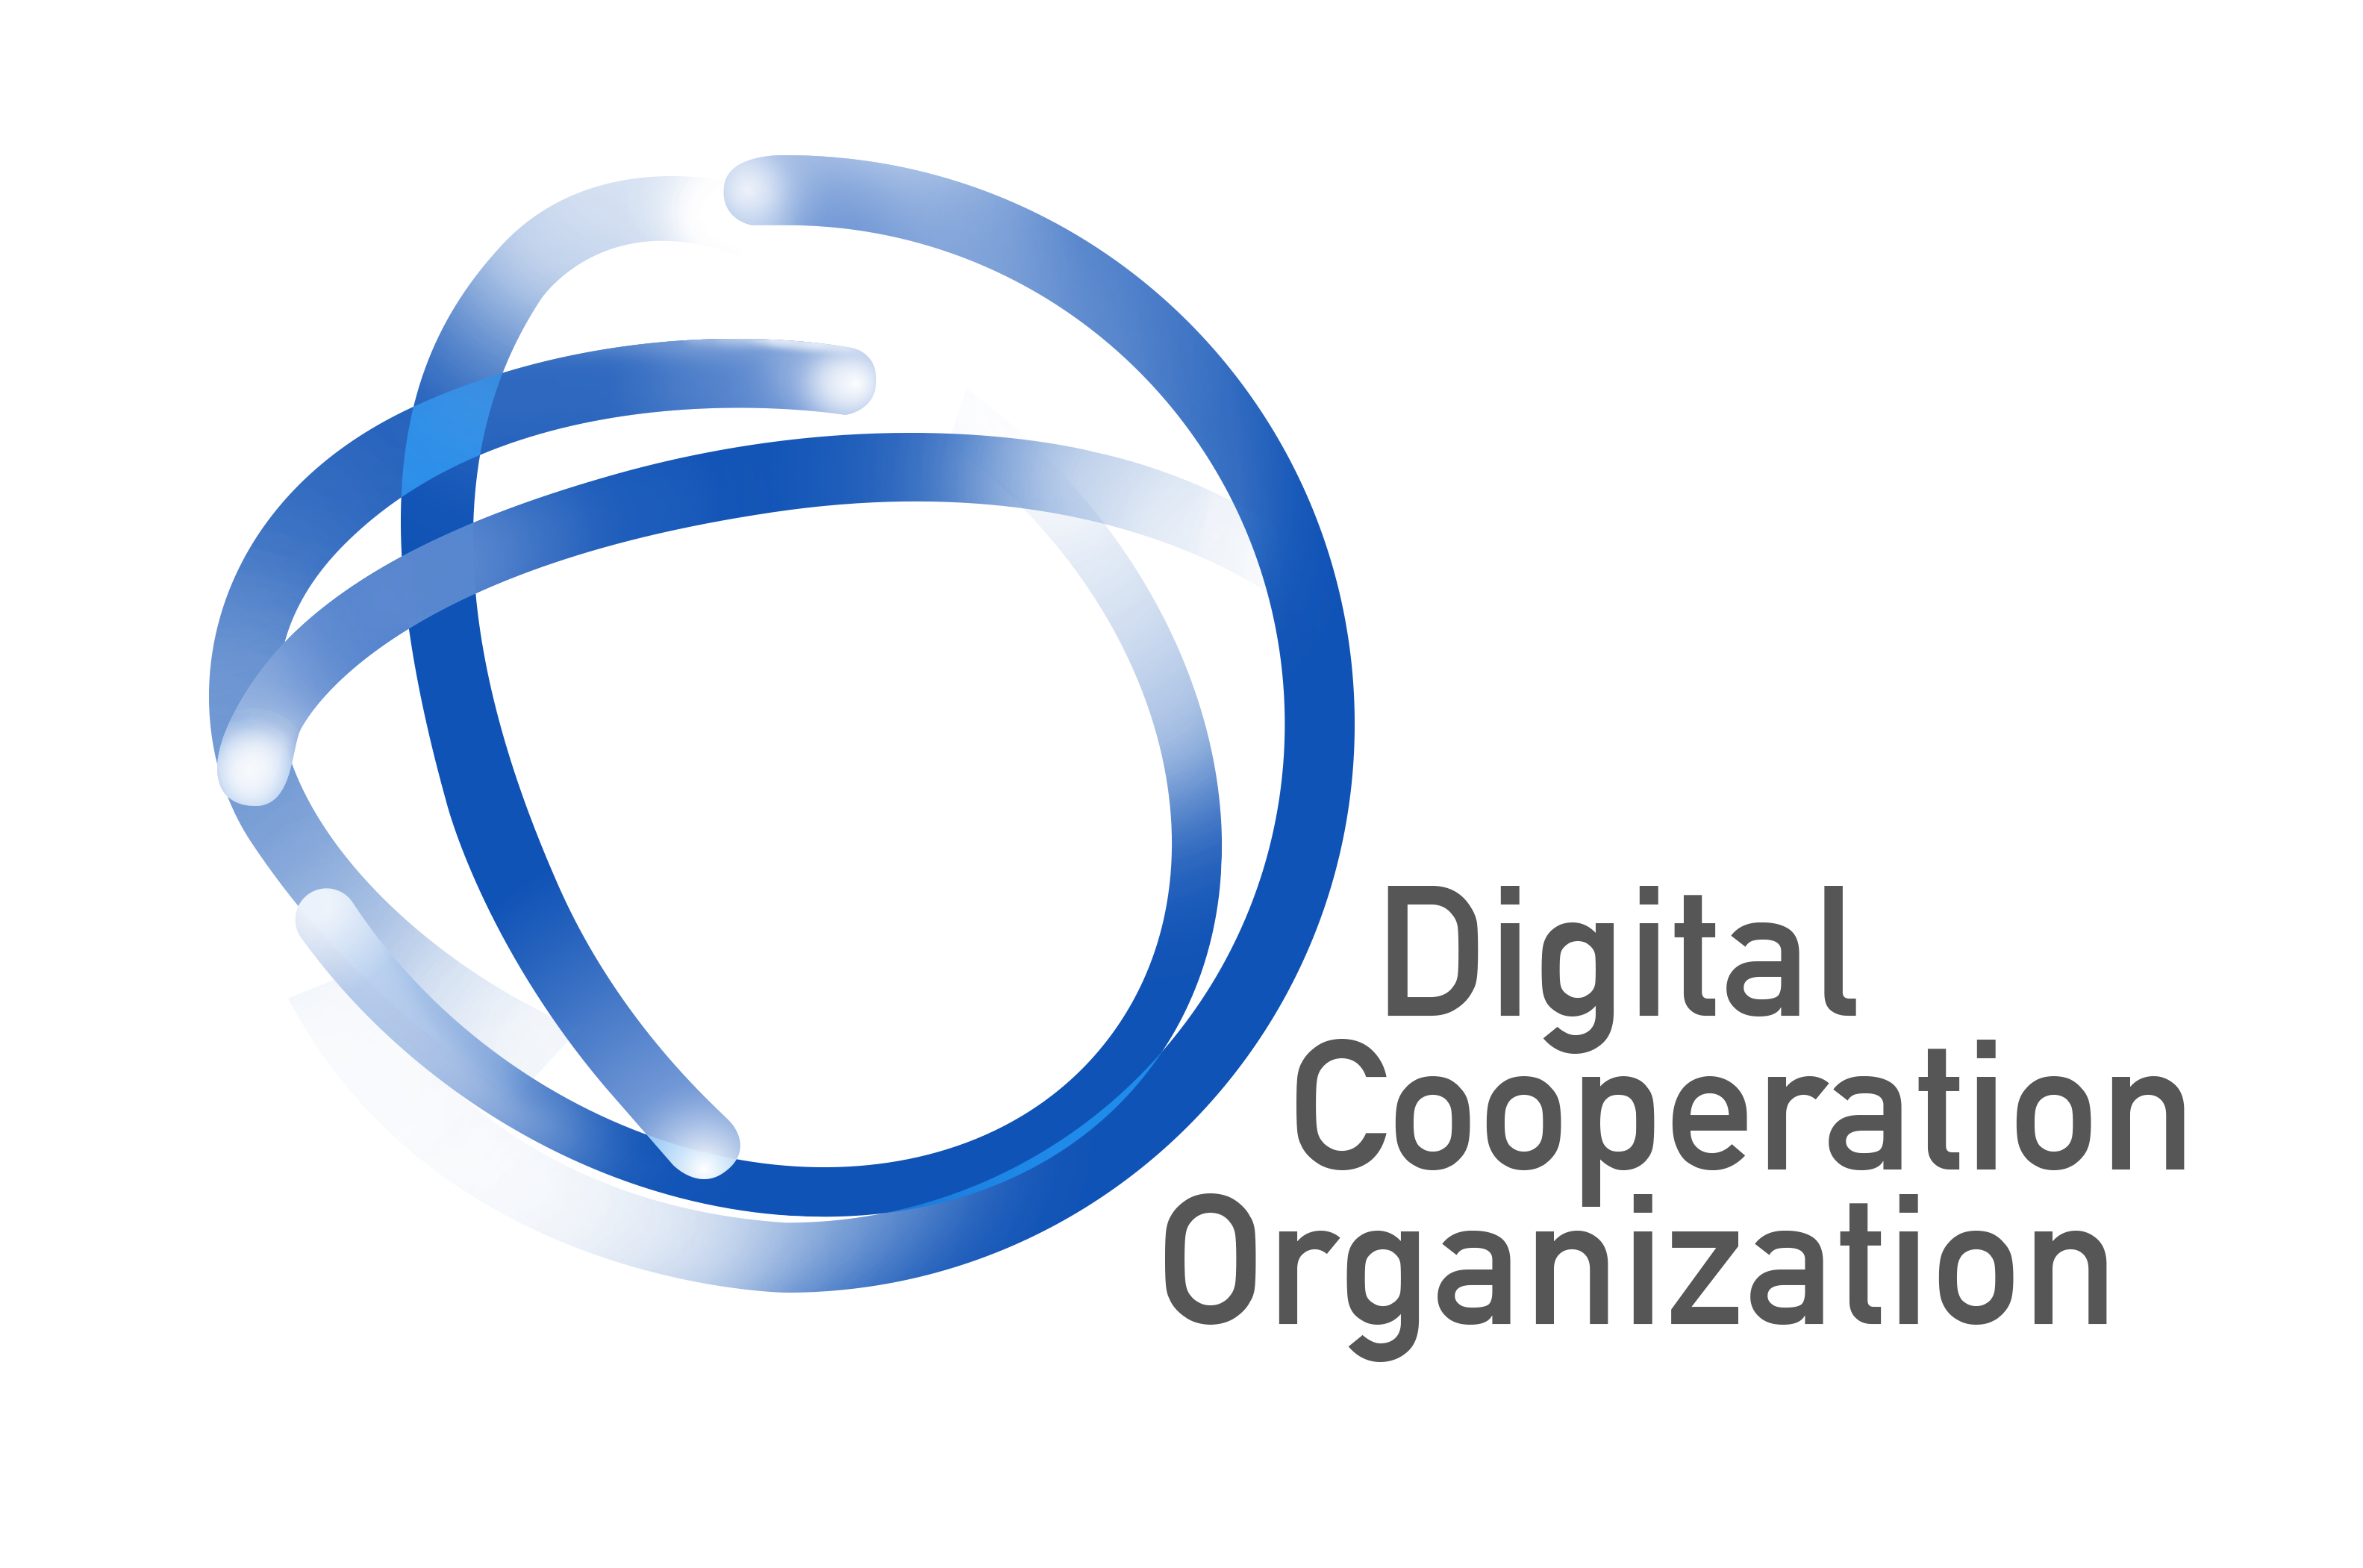 The Digital Cooperation Organization Launches the Digital Economy